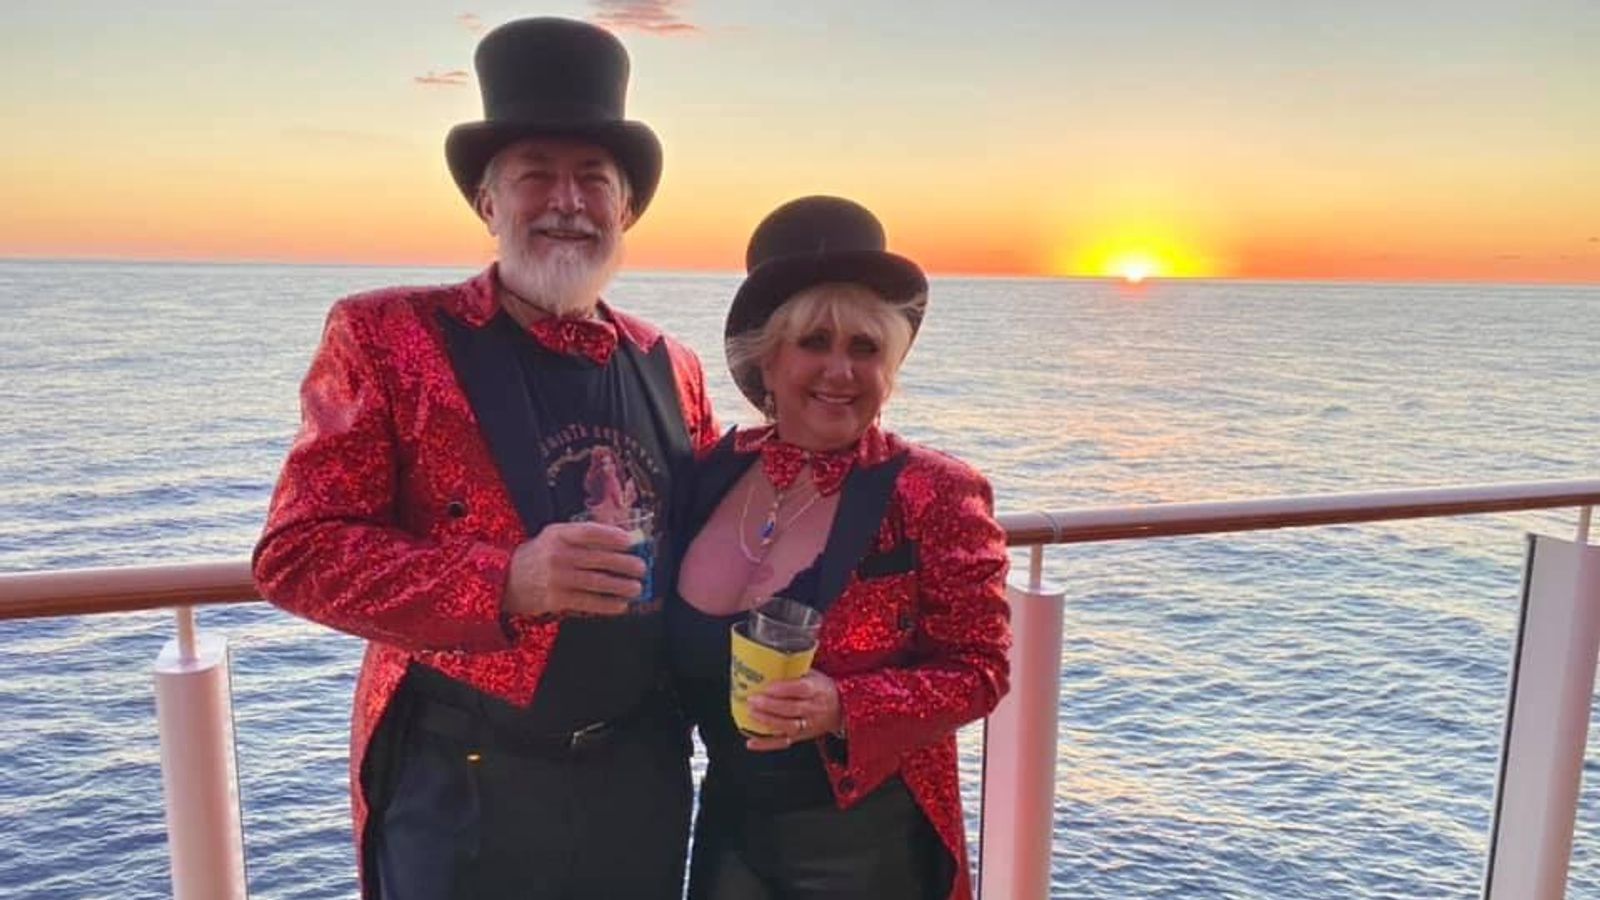 The couple who 'sold everything' to live on cruise ships for the rest of their lives